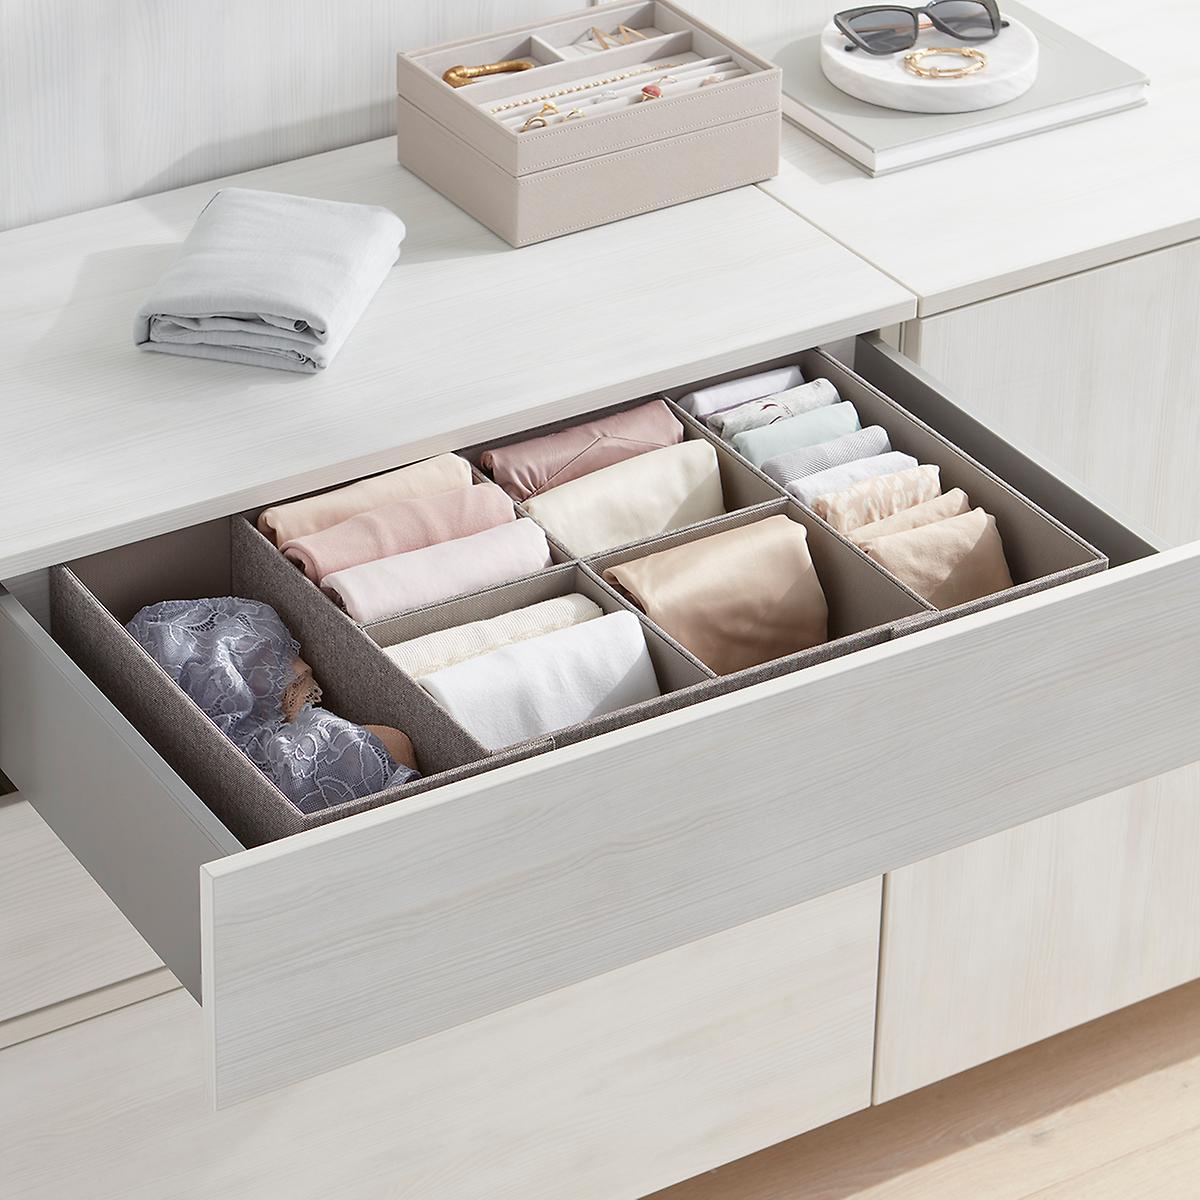 Grey Cambridge Drawer Organizers The Container Store